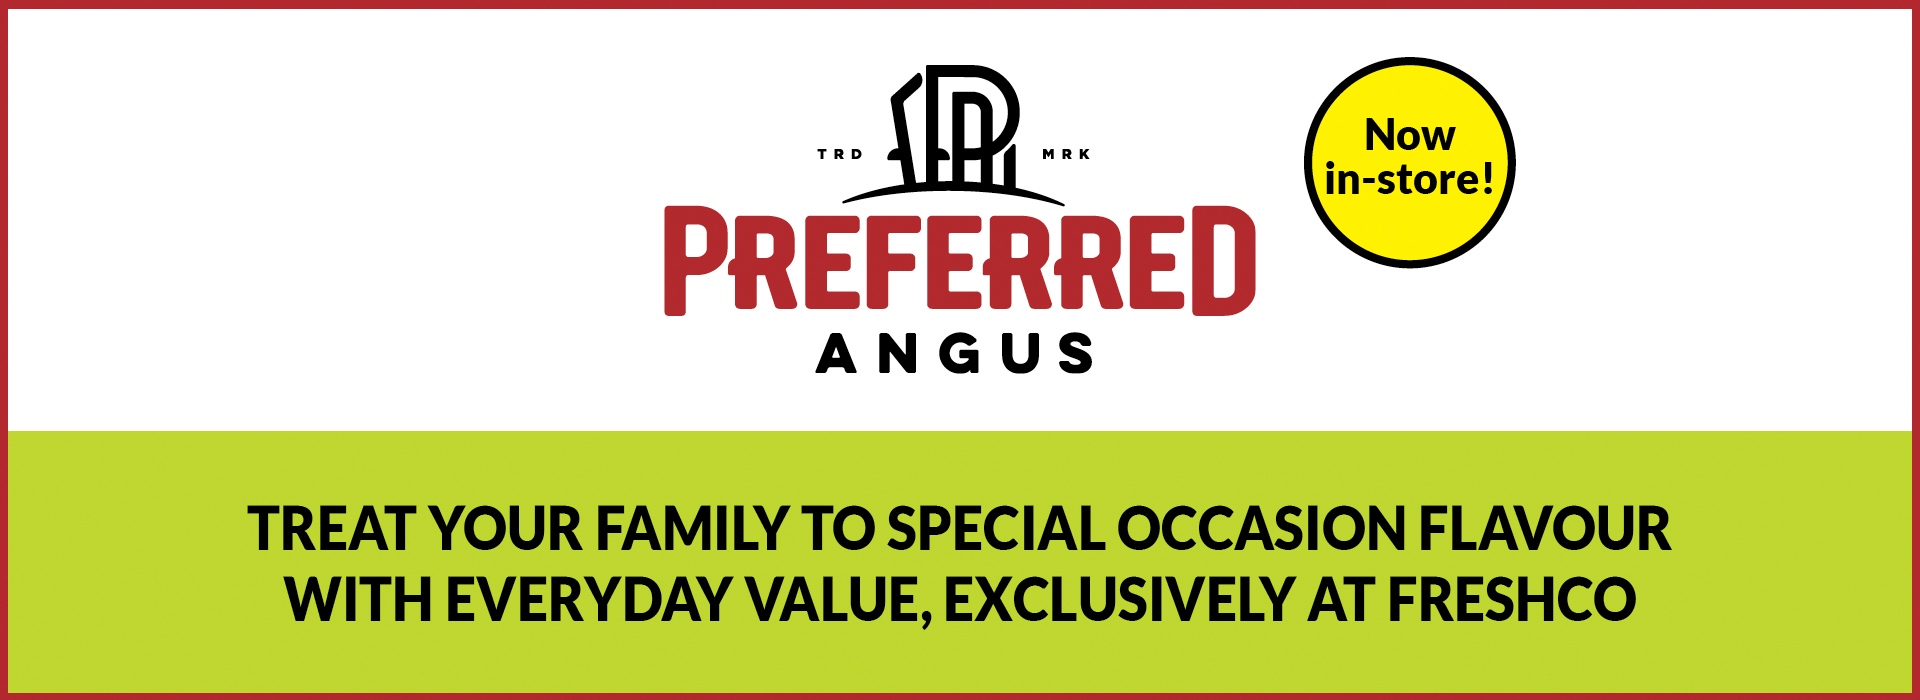 Text reading, “Treat your family to special occasion flavour with everyday value, exclusively at freshco”. Along with a logo of Preferred Angus in the top centre.